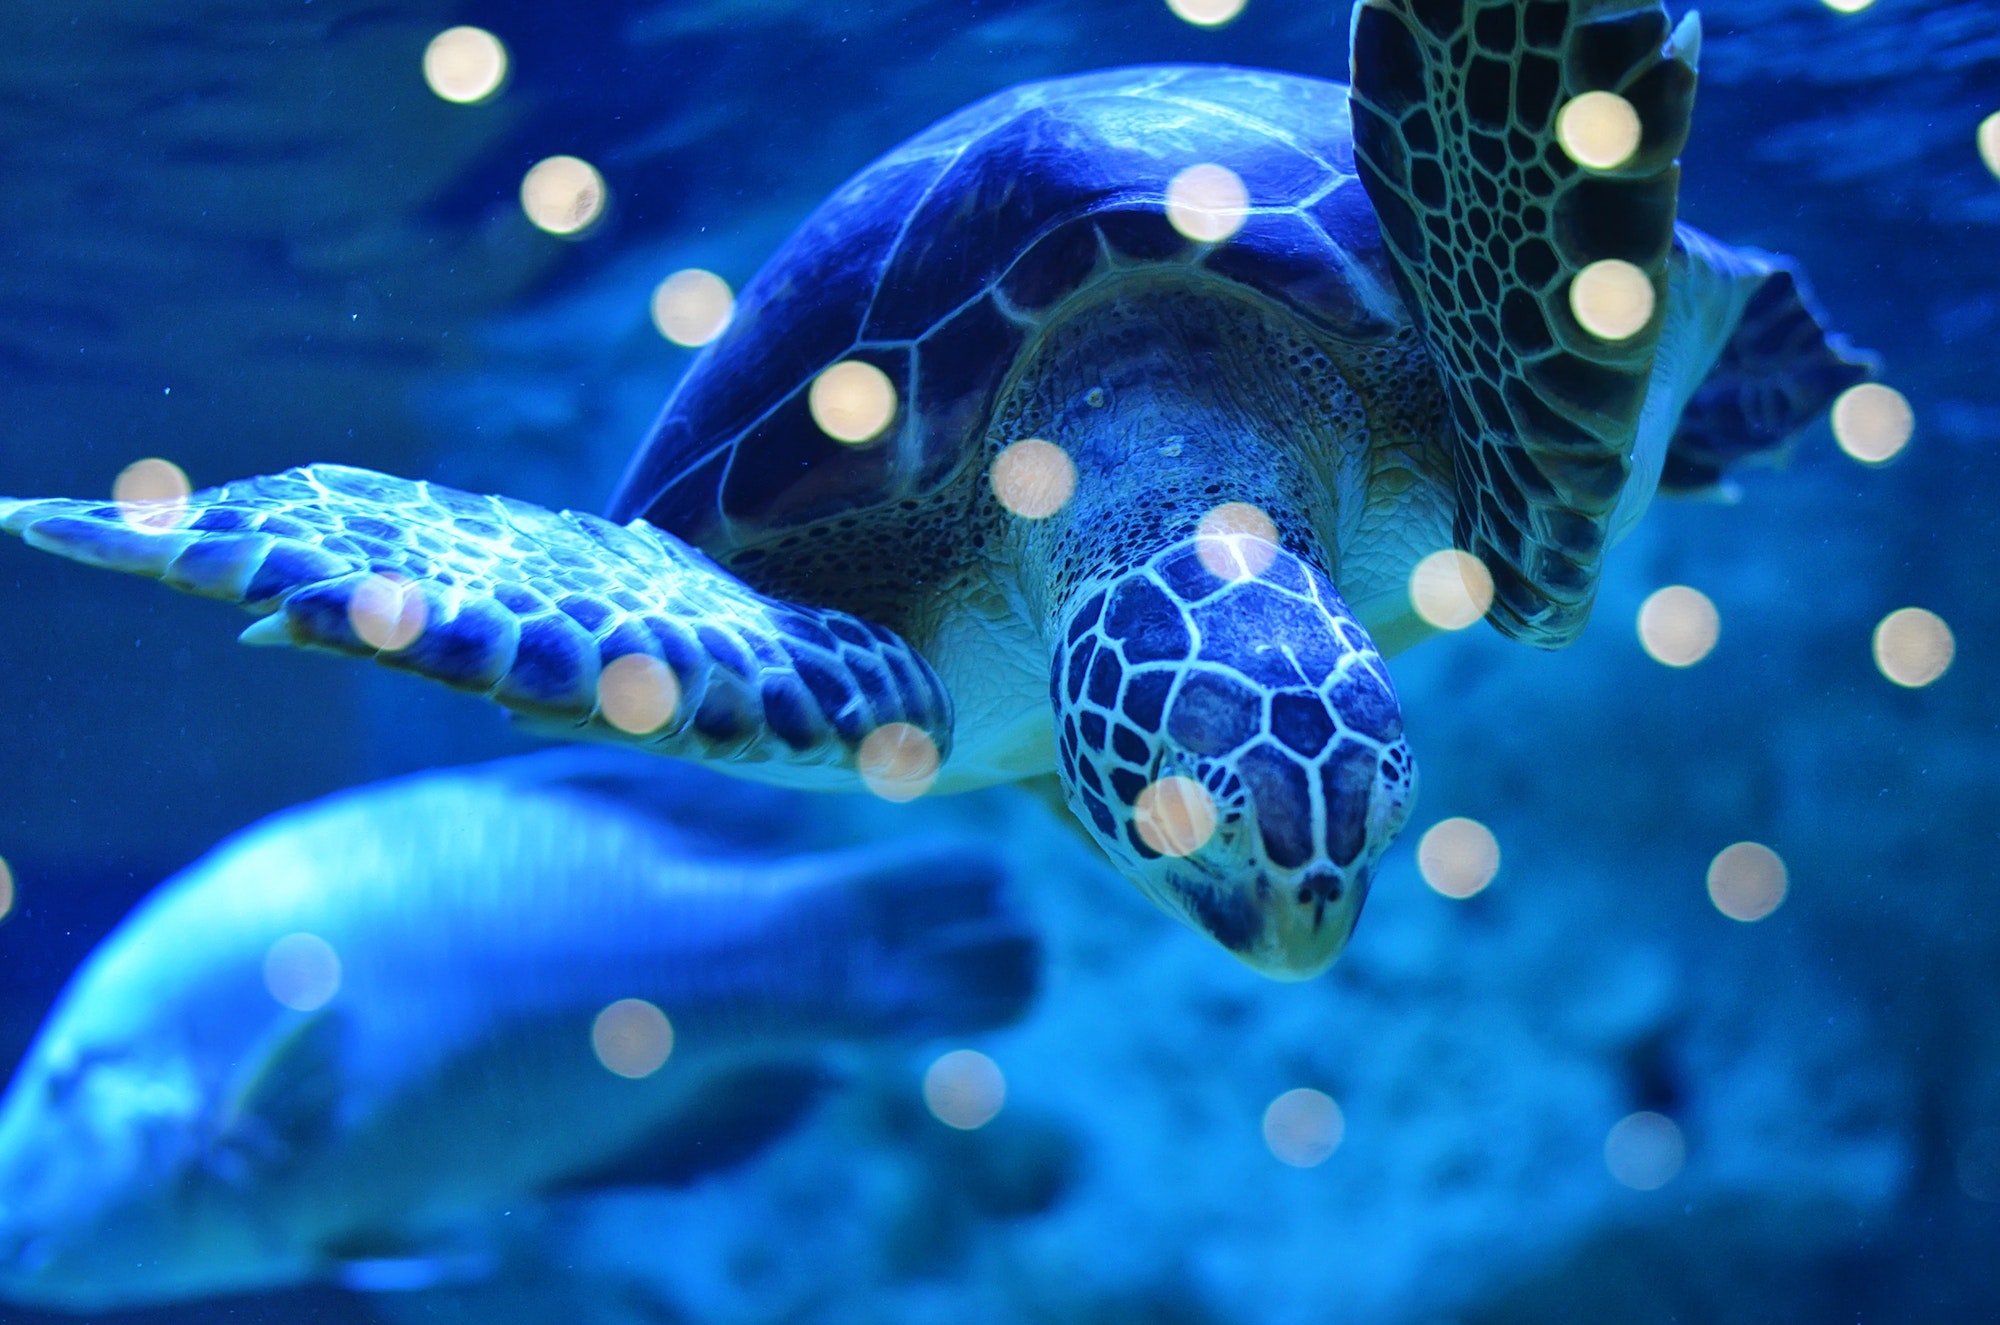 Big turtle swims in blue water